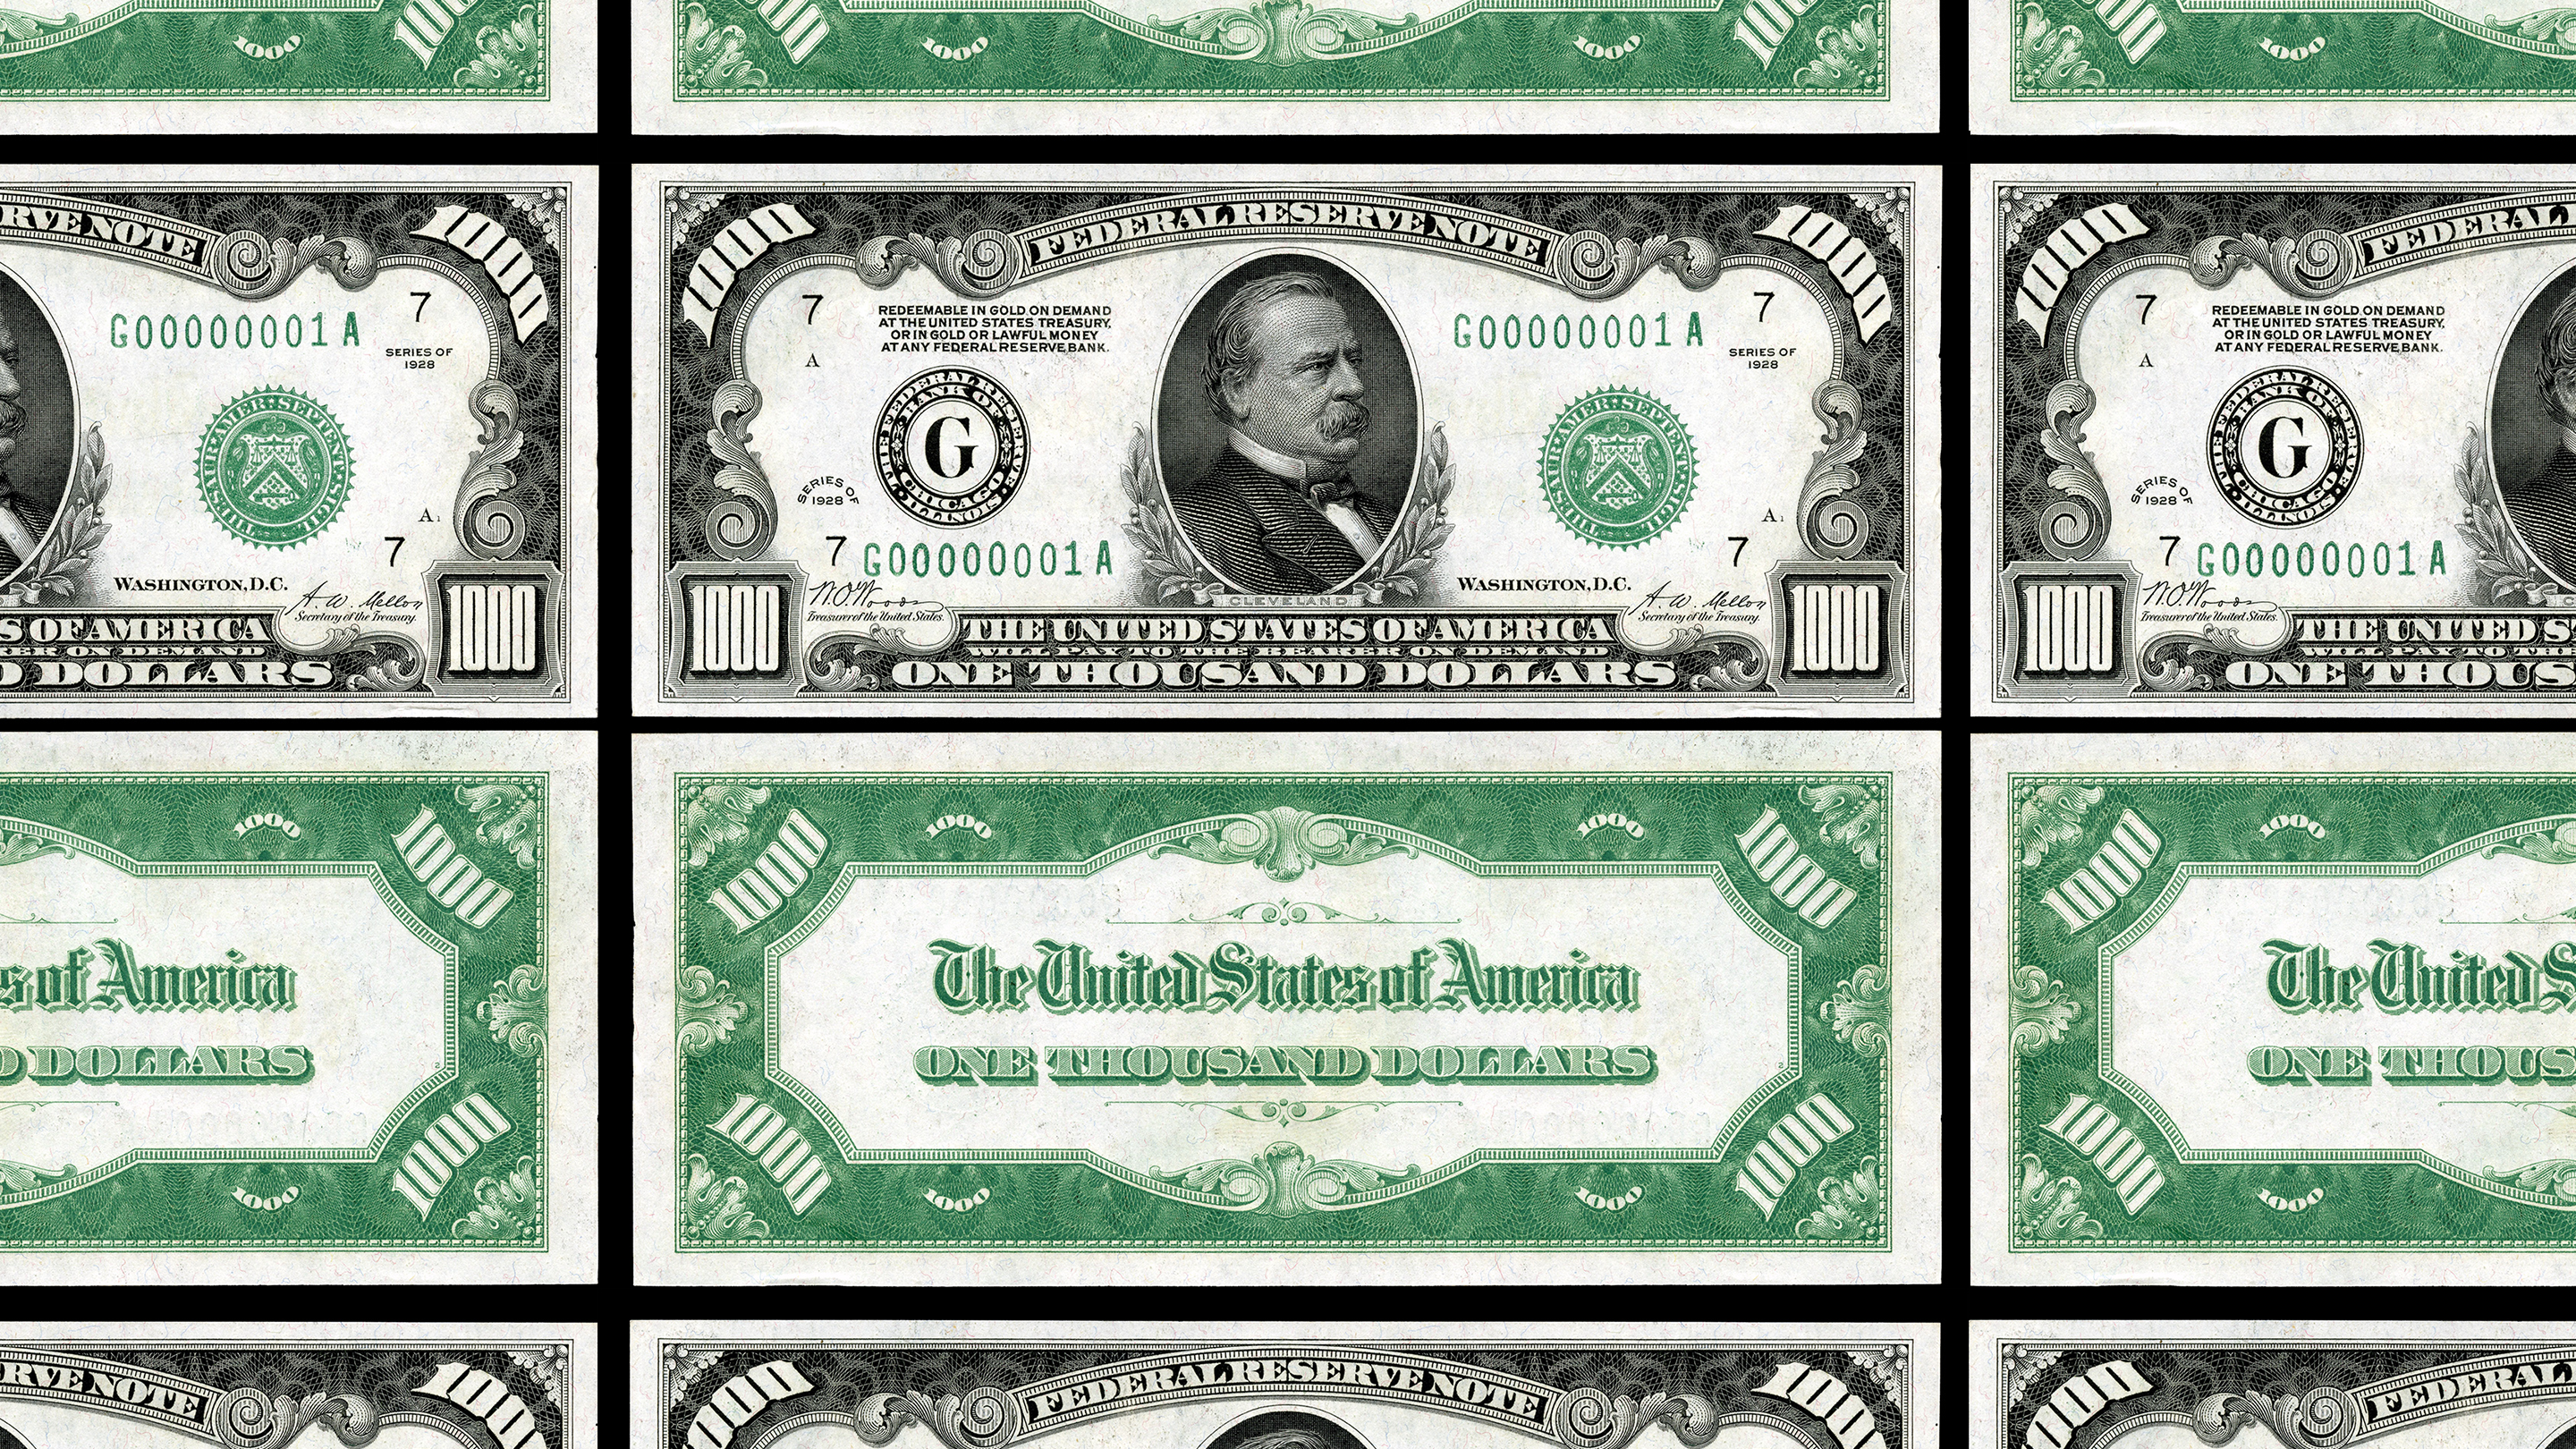 Are there any $1,000 bills in circulation, and why or why not? - Quora